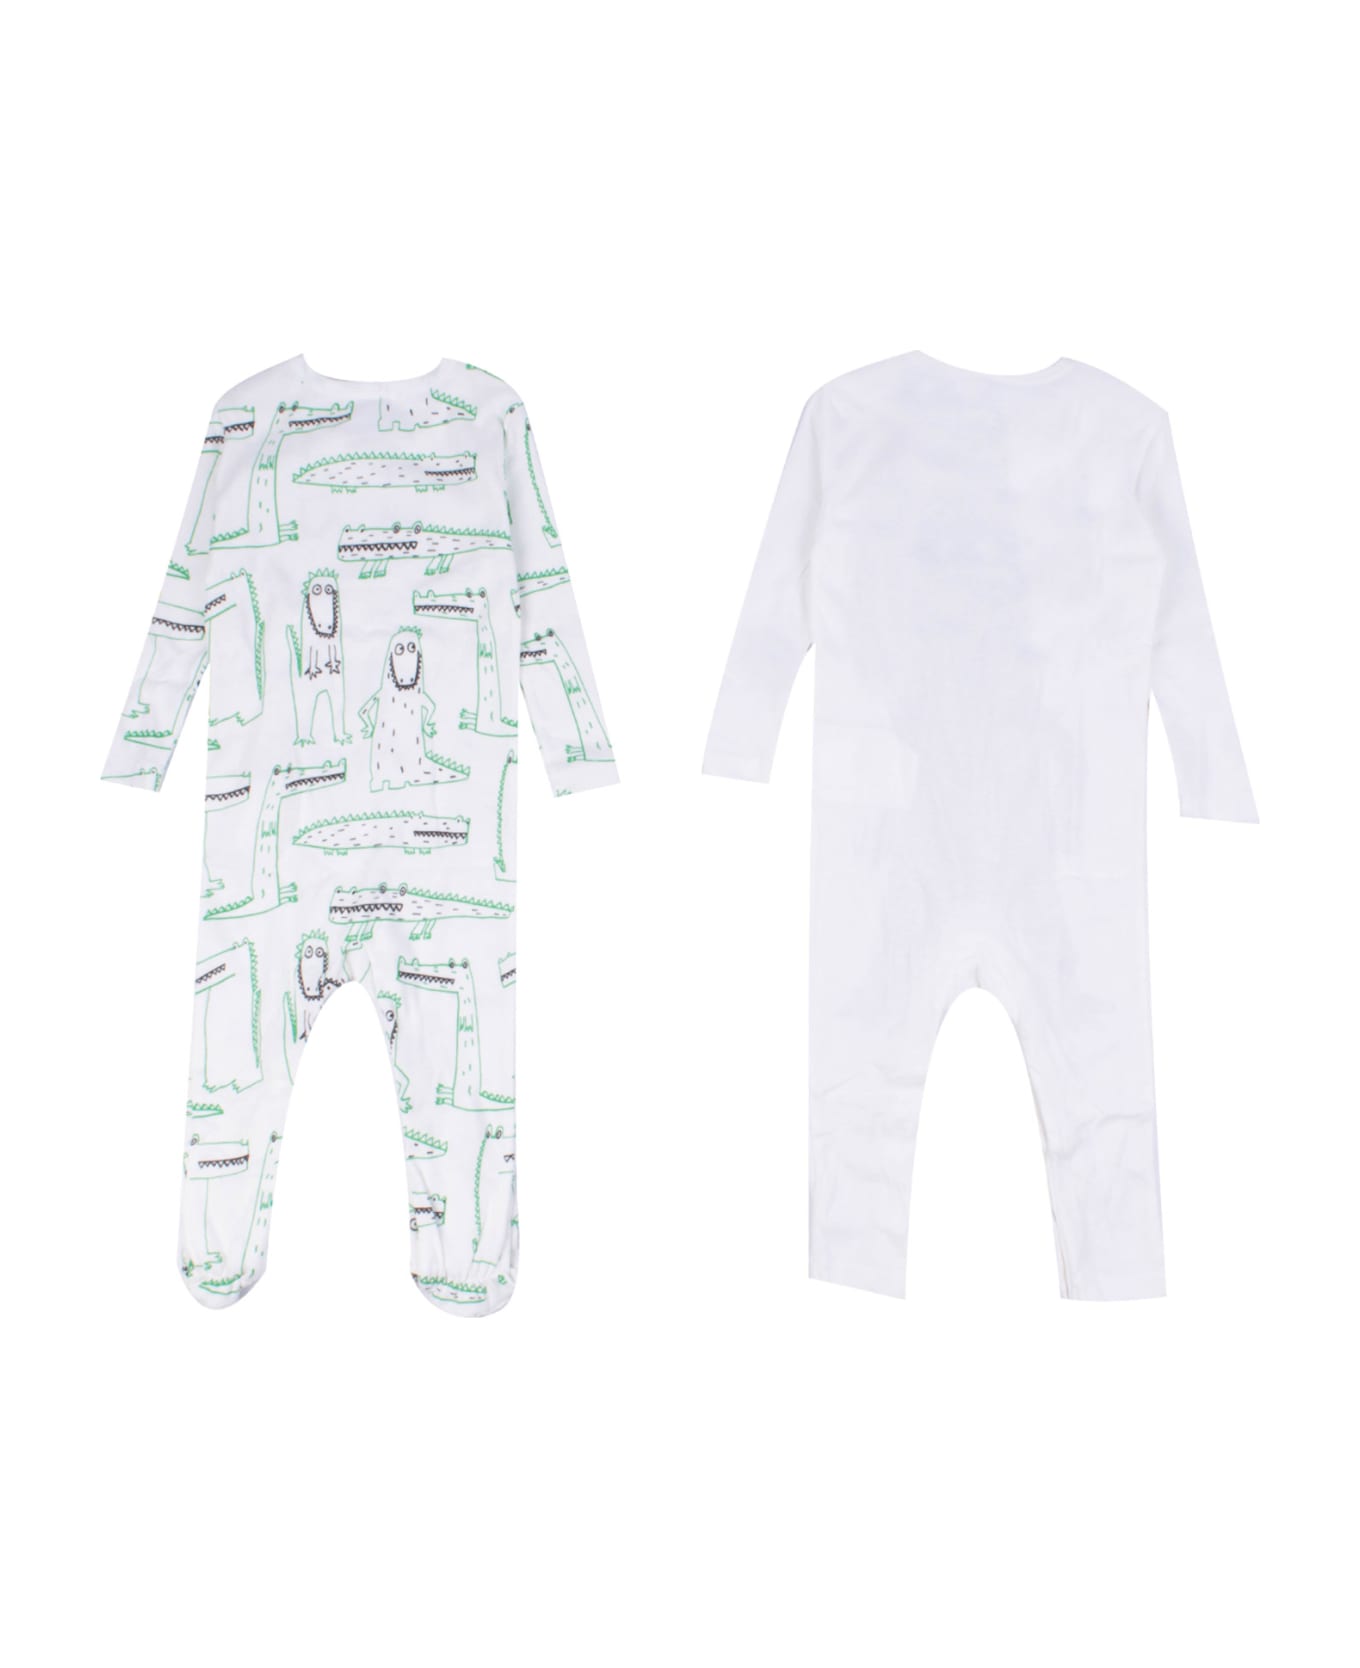 Stella McCartney Kids Set Of Two Cotton Rompers - White